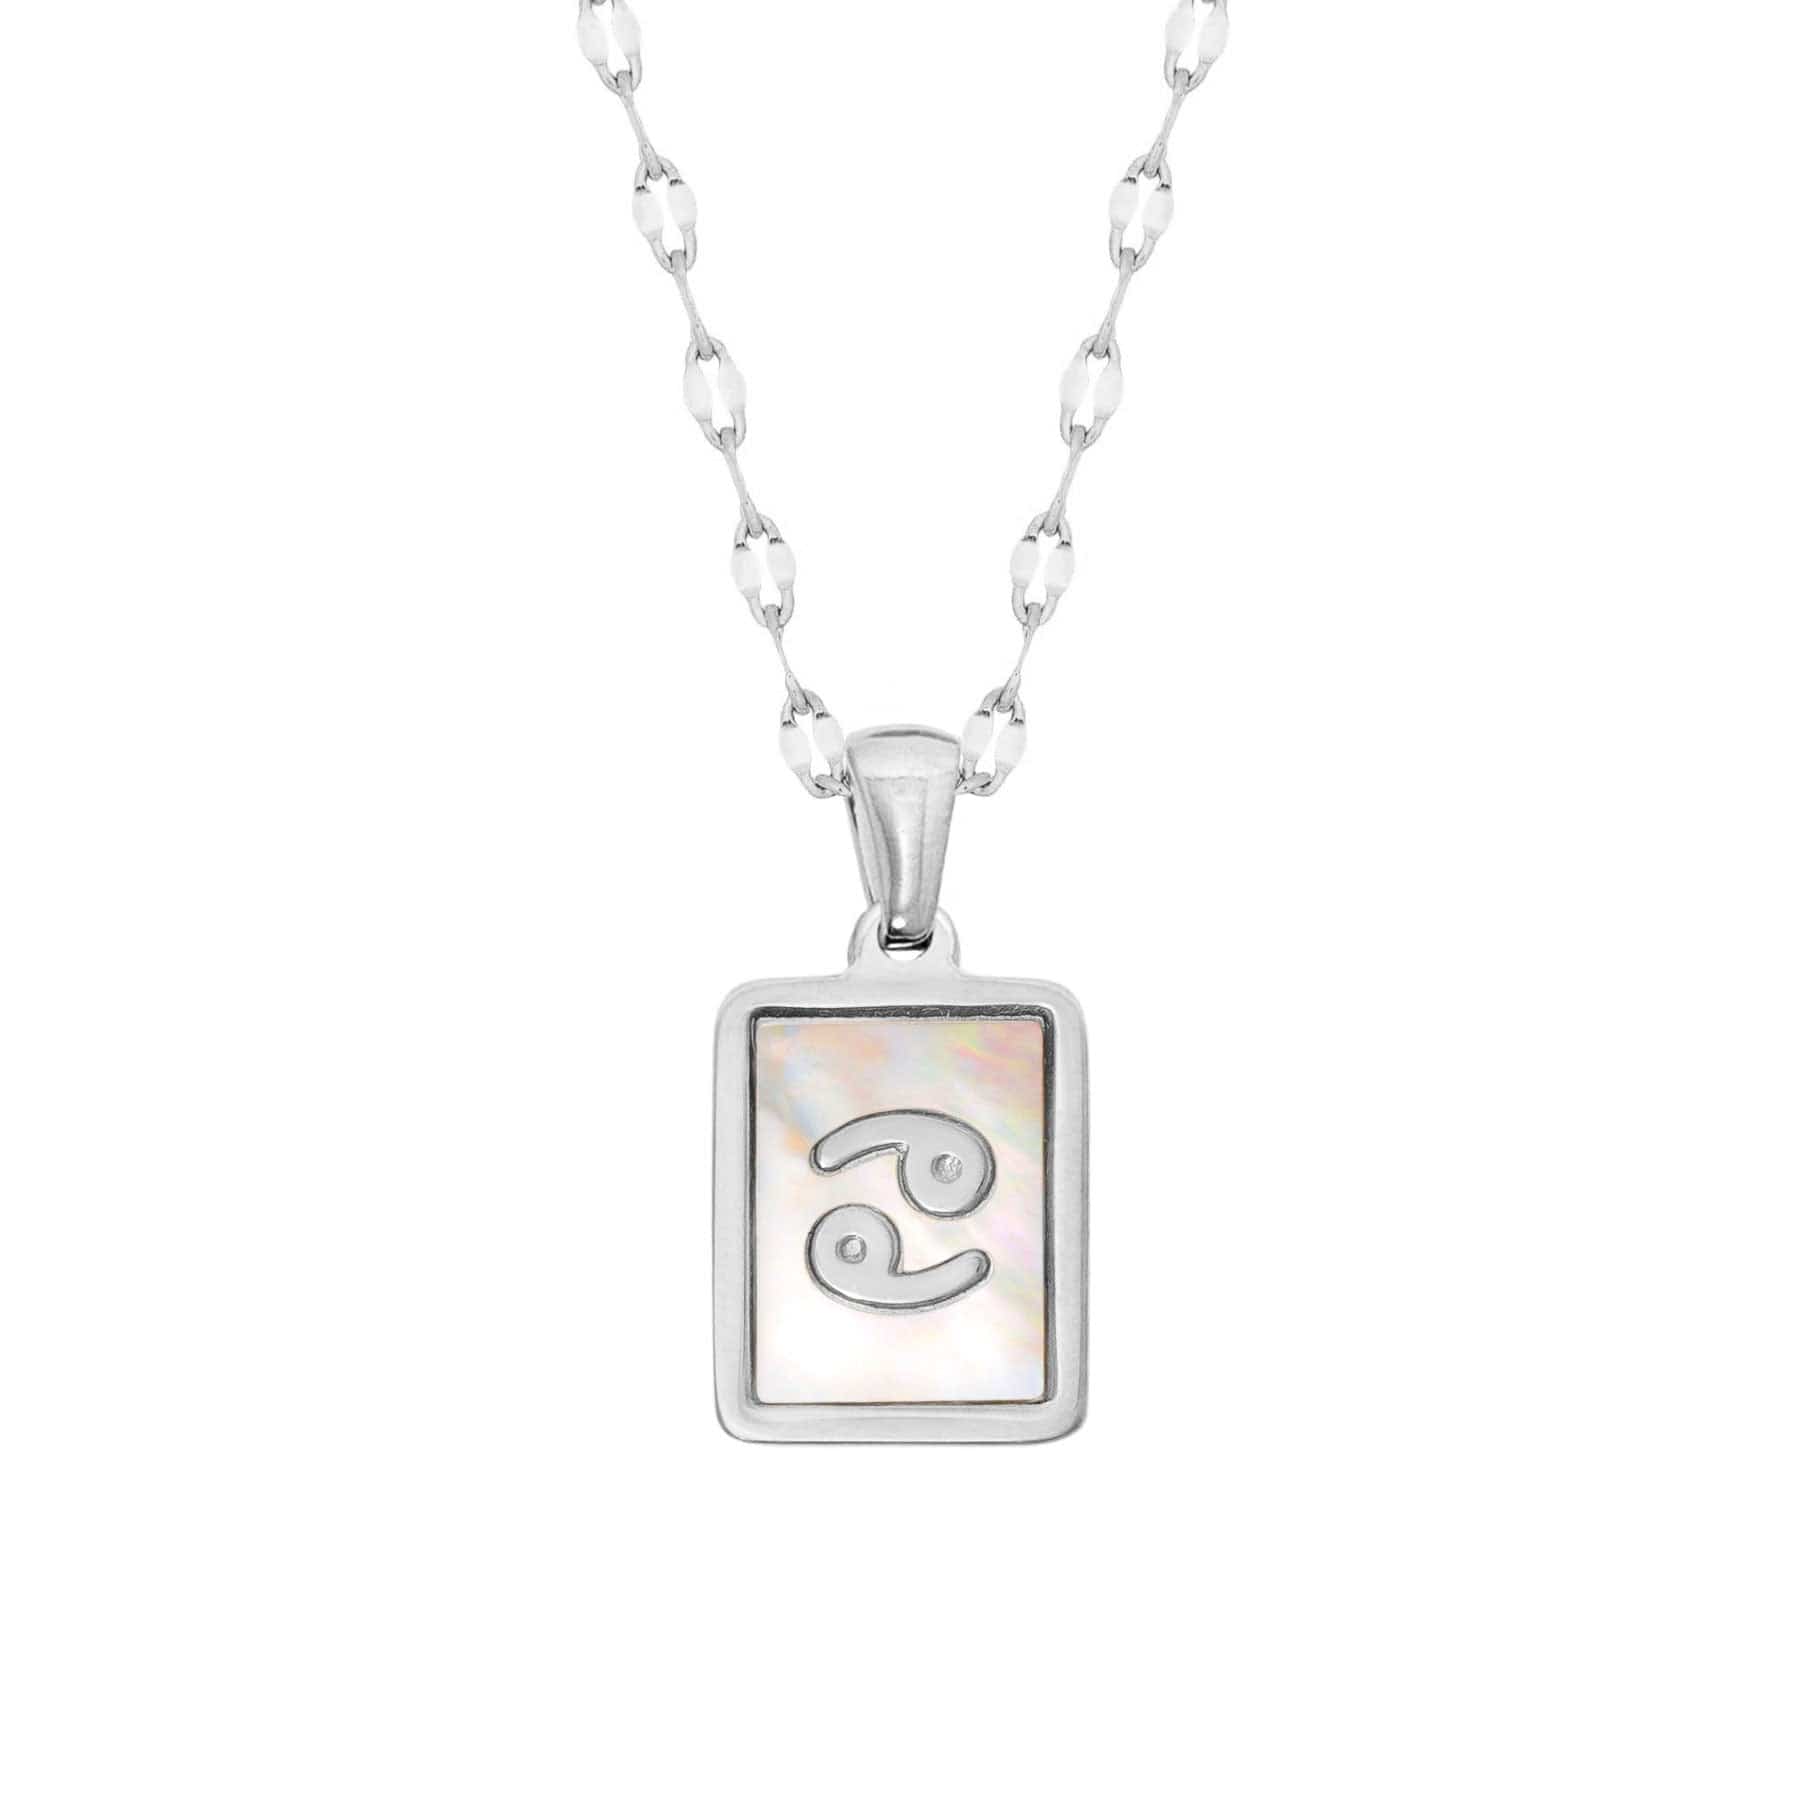 BohoMoon Stainless Steel Labyrinth Zodiac Necklace